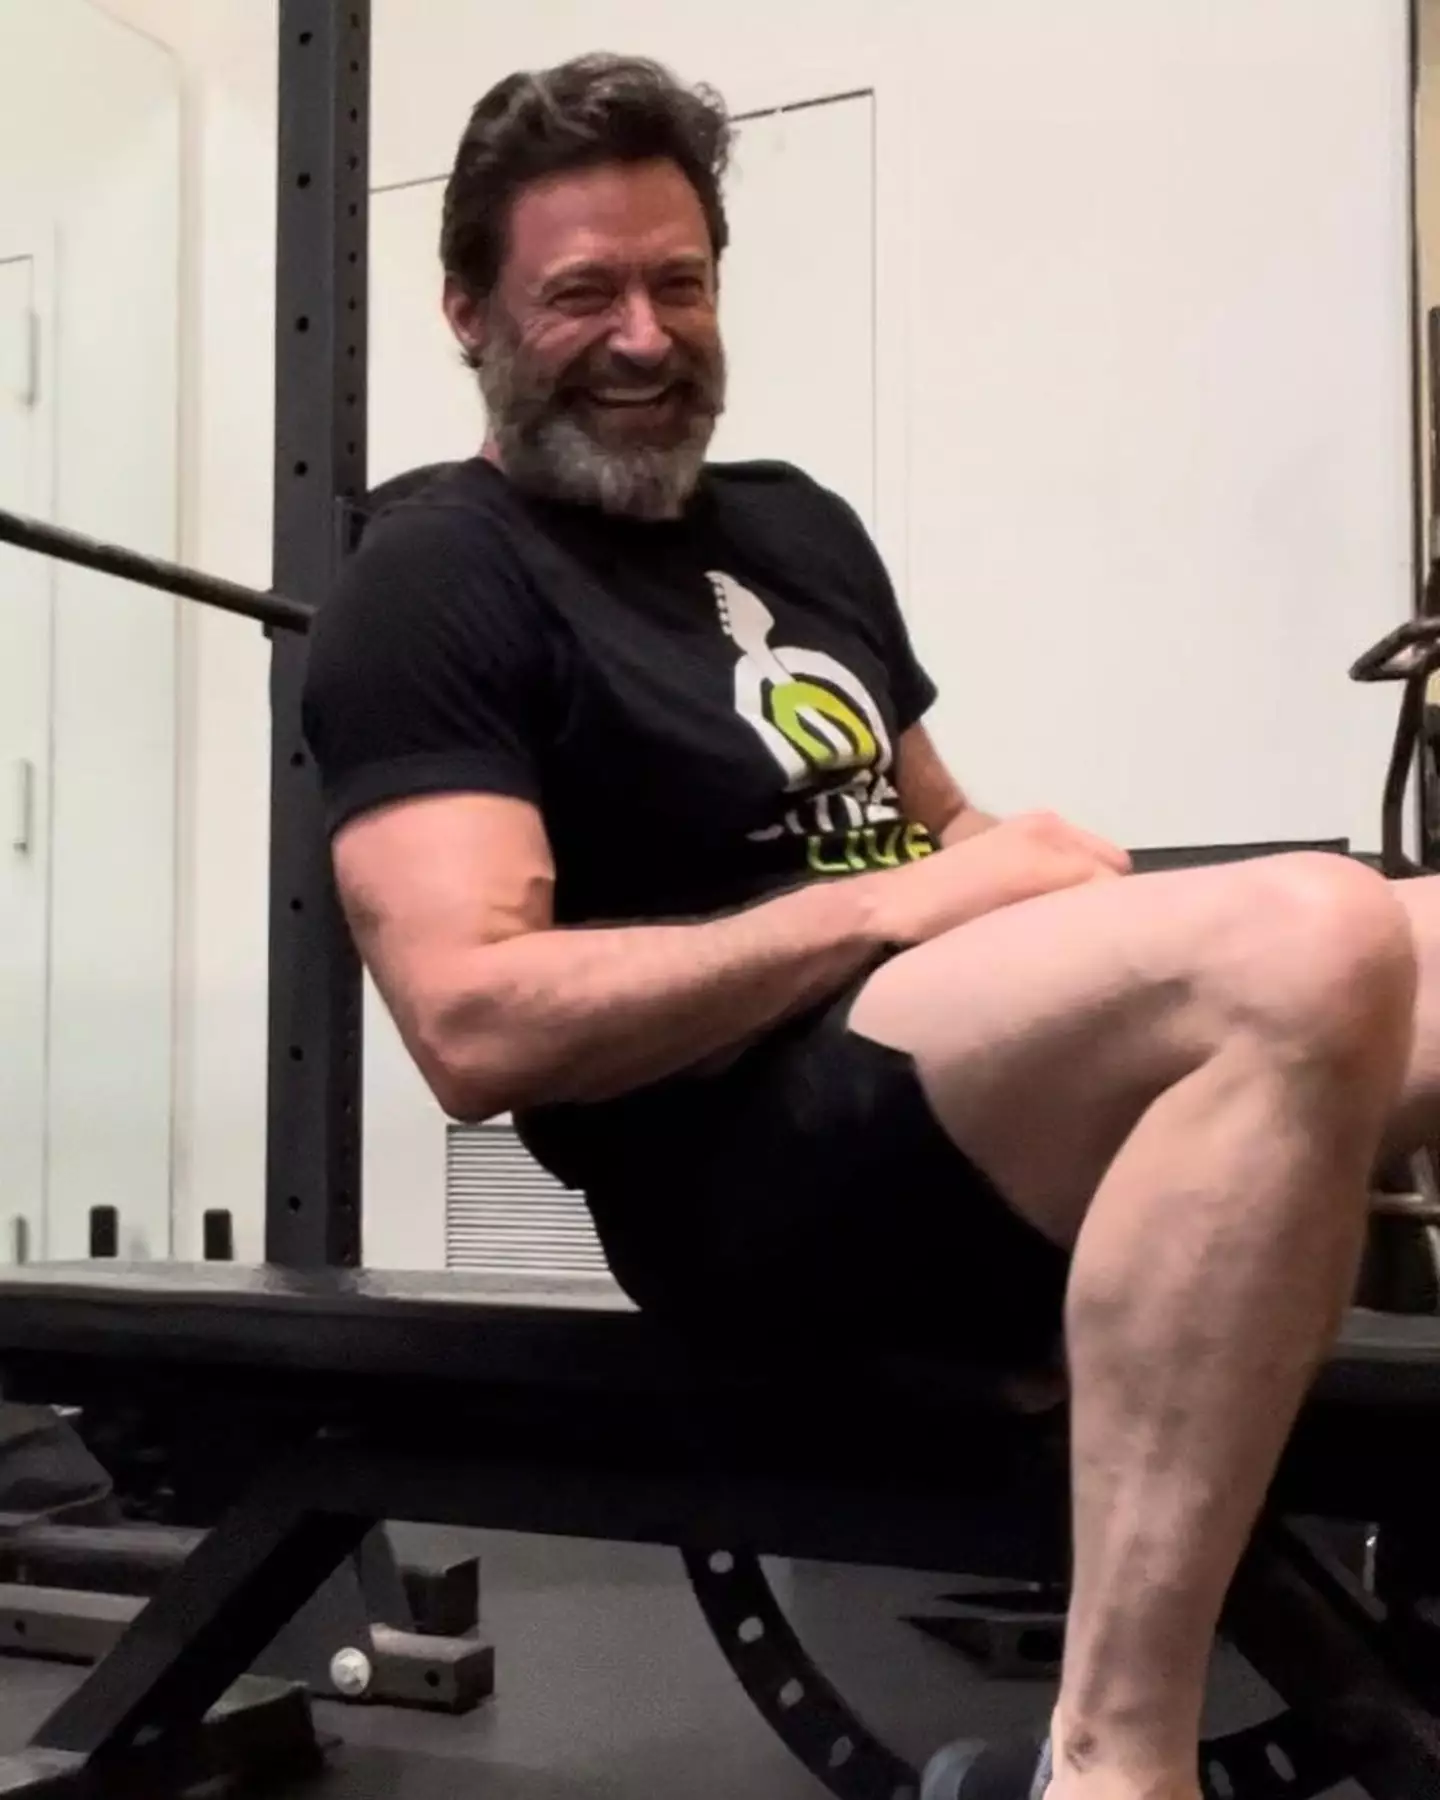 You know the internet is a wild place when you have people questioning Wolverine's calves.